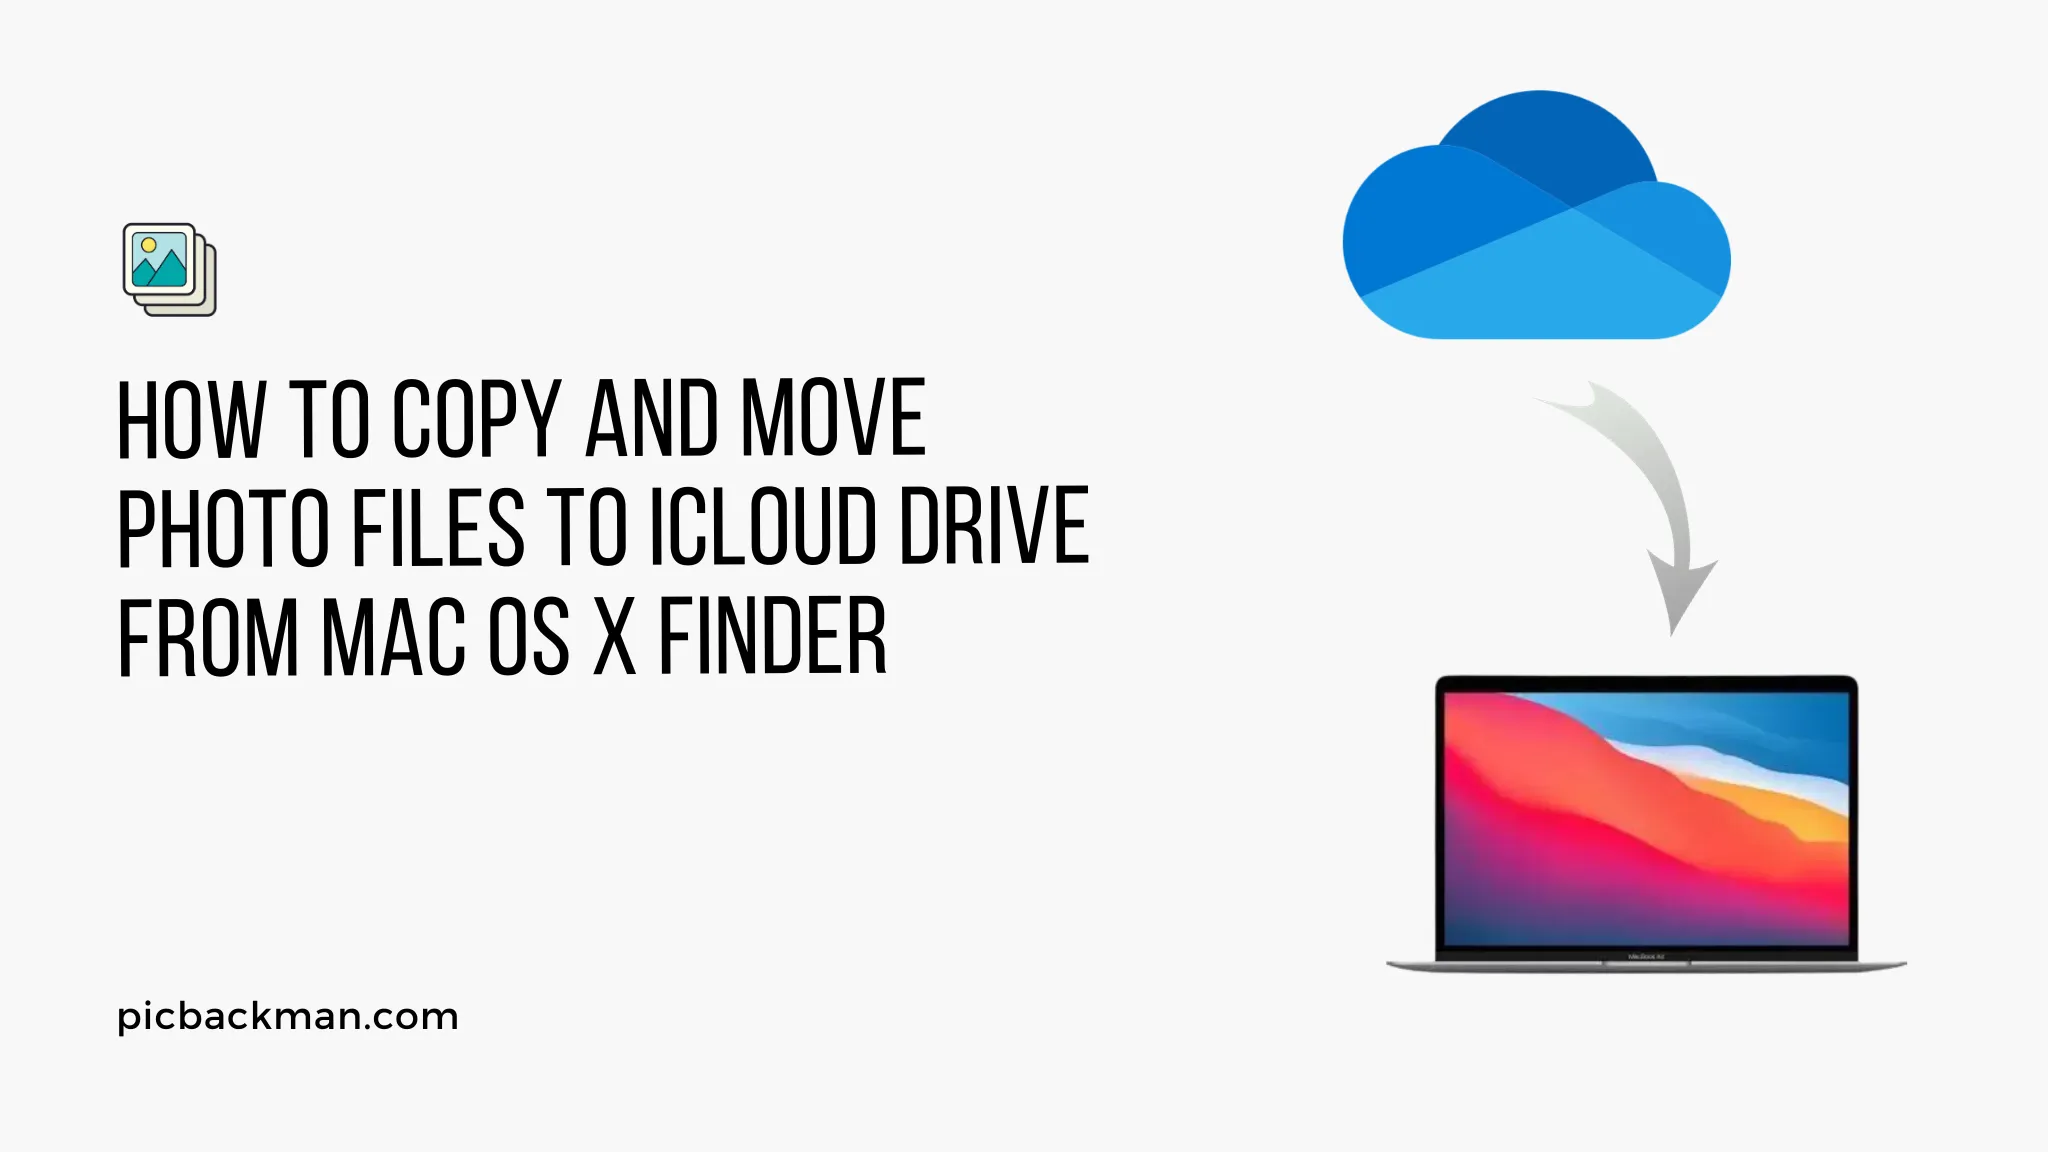 How to Copy and Move Photo Files to iCloud Drive from Mac OS X Finder?